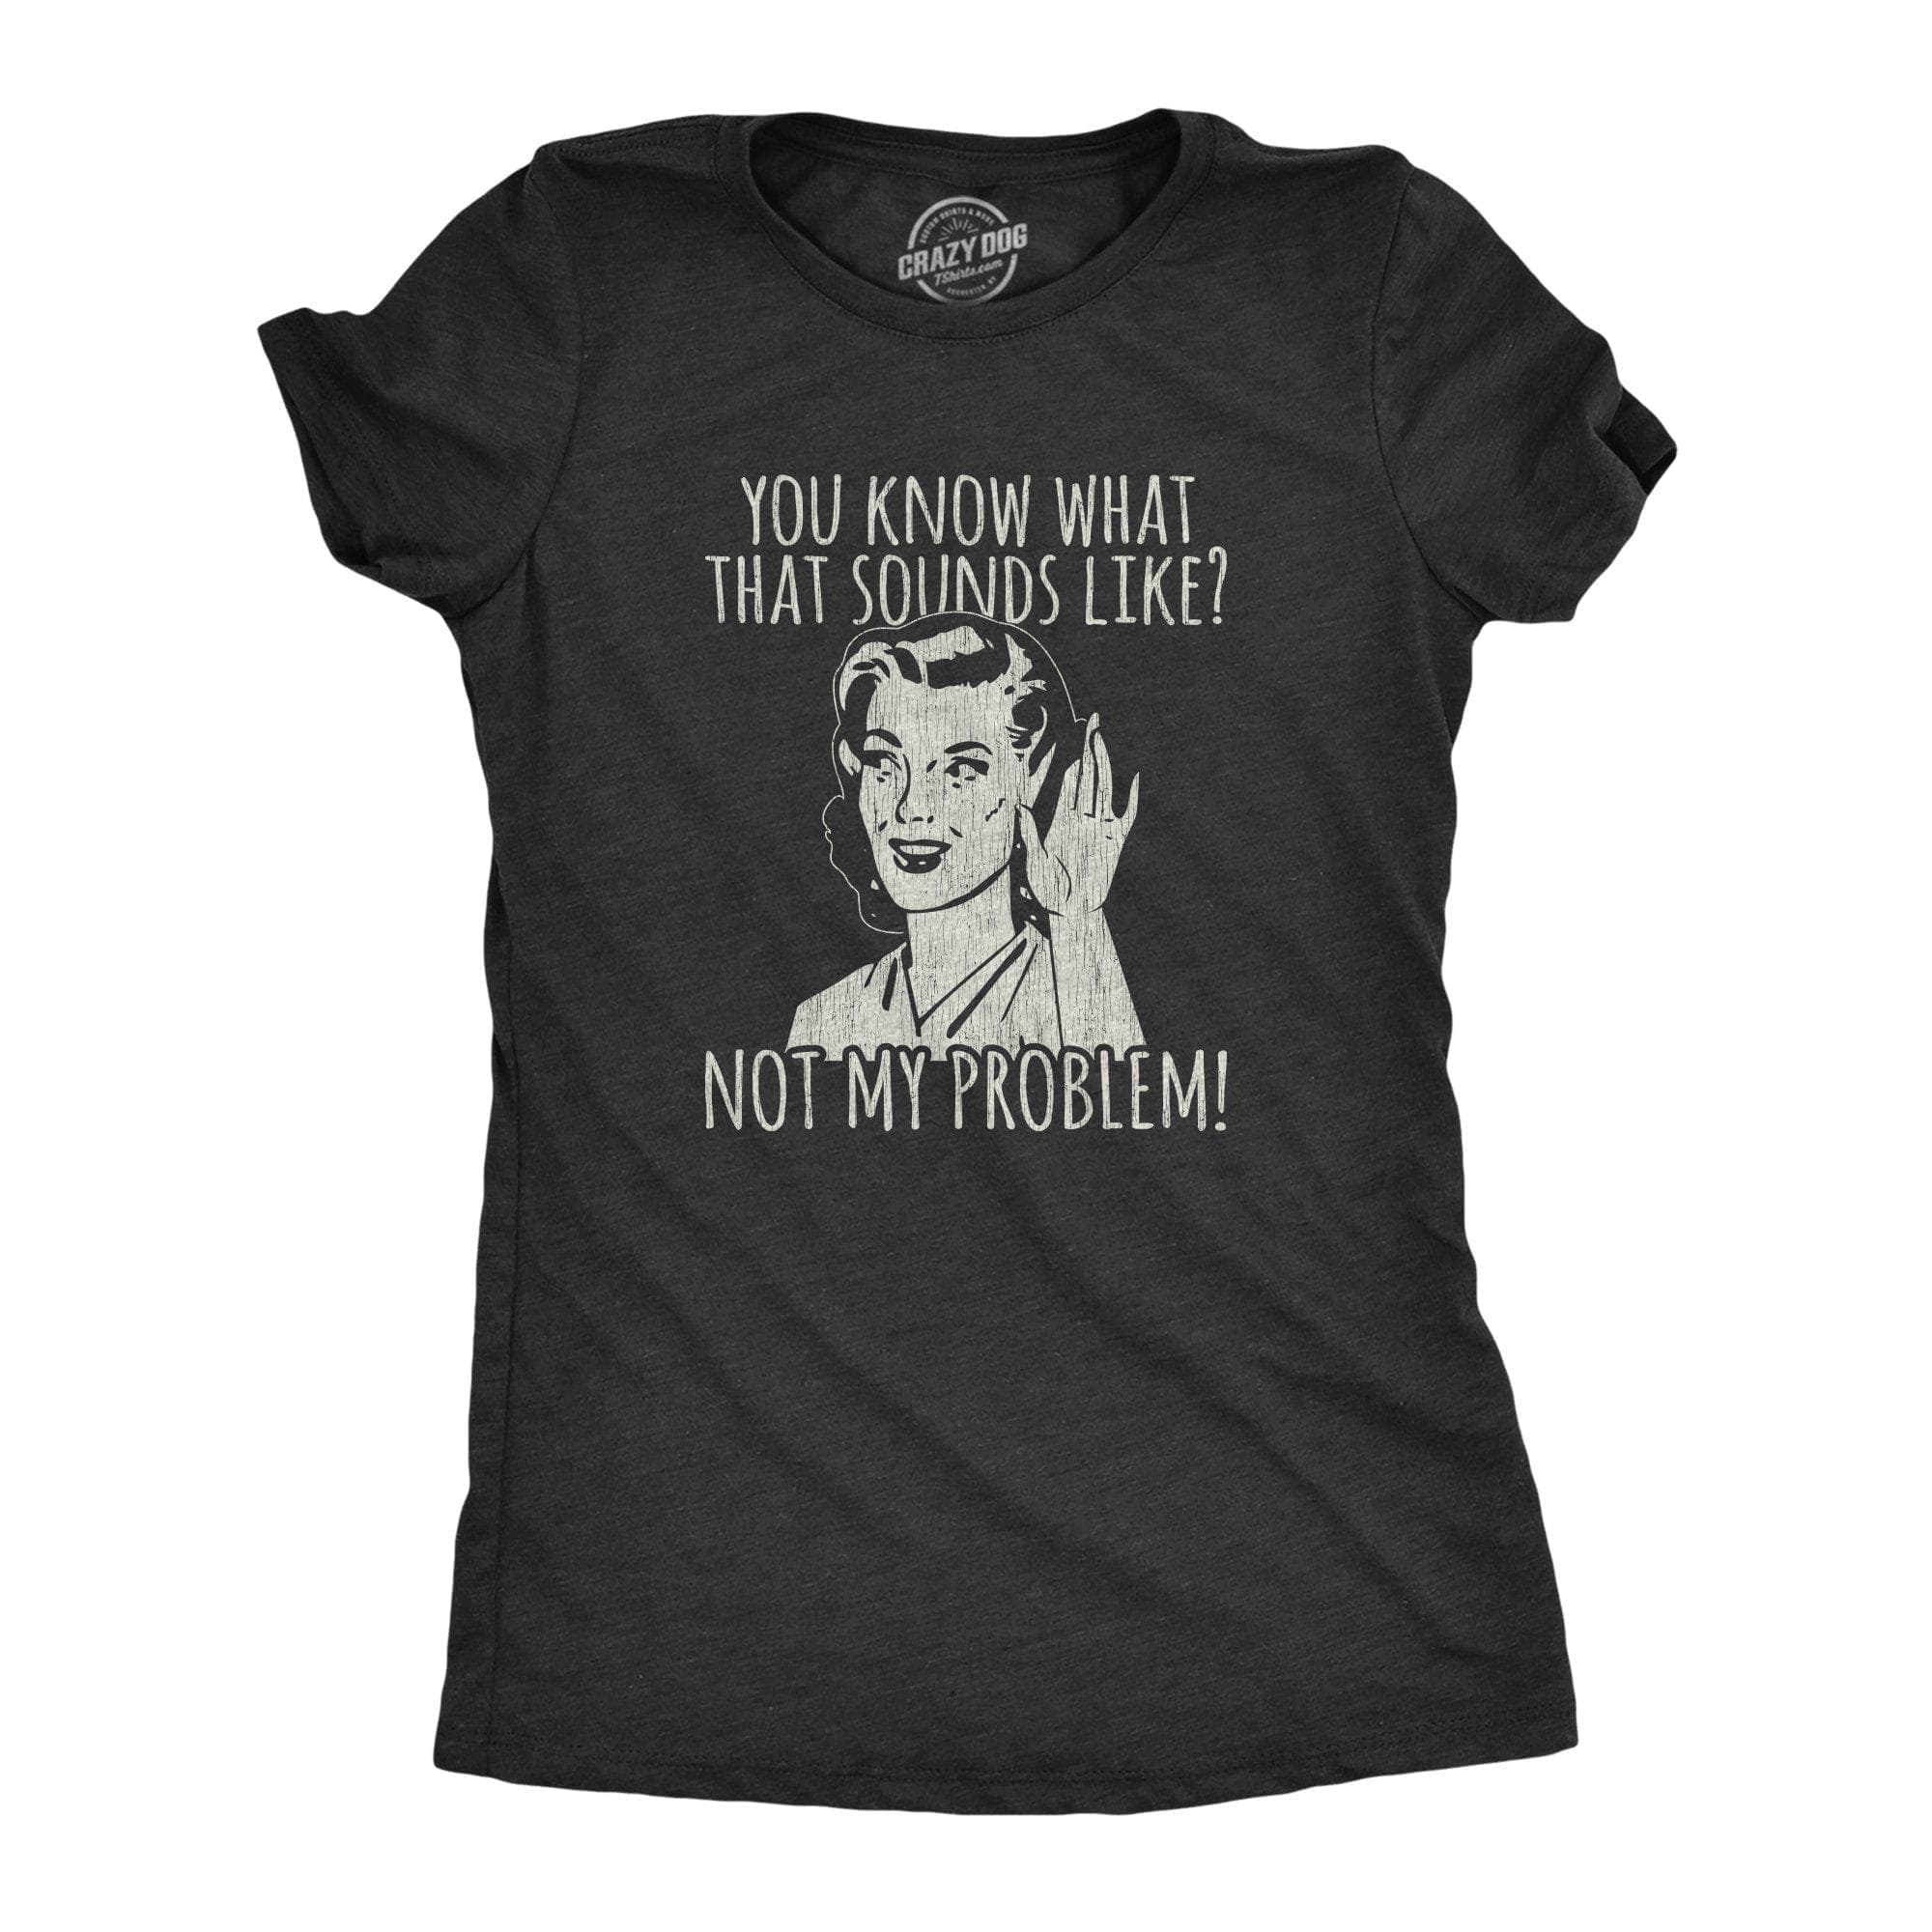 You Know What That Sounds Like? Not My Problem! Women's Tshirt - Crazy Dog T-Shirts